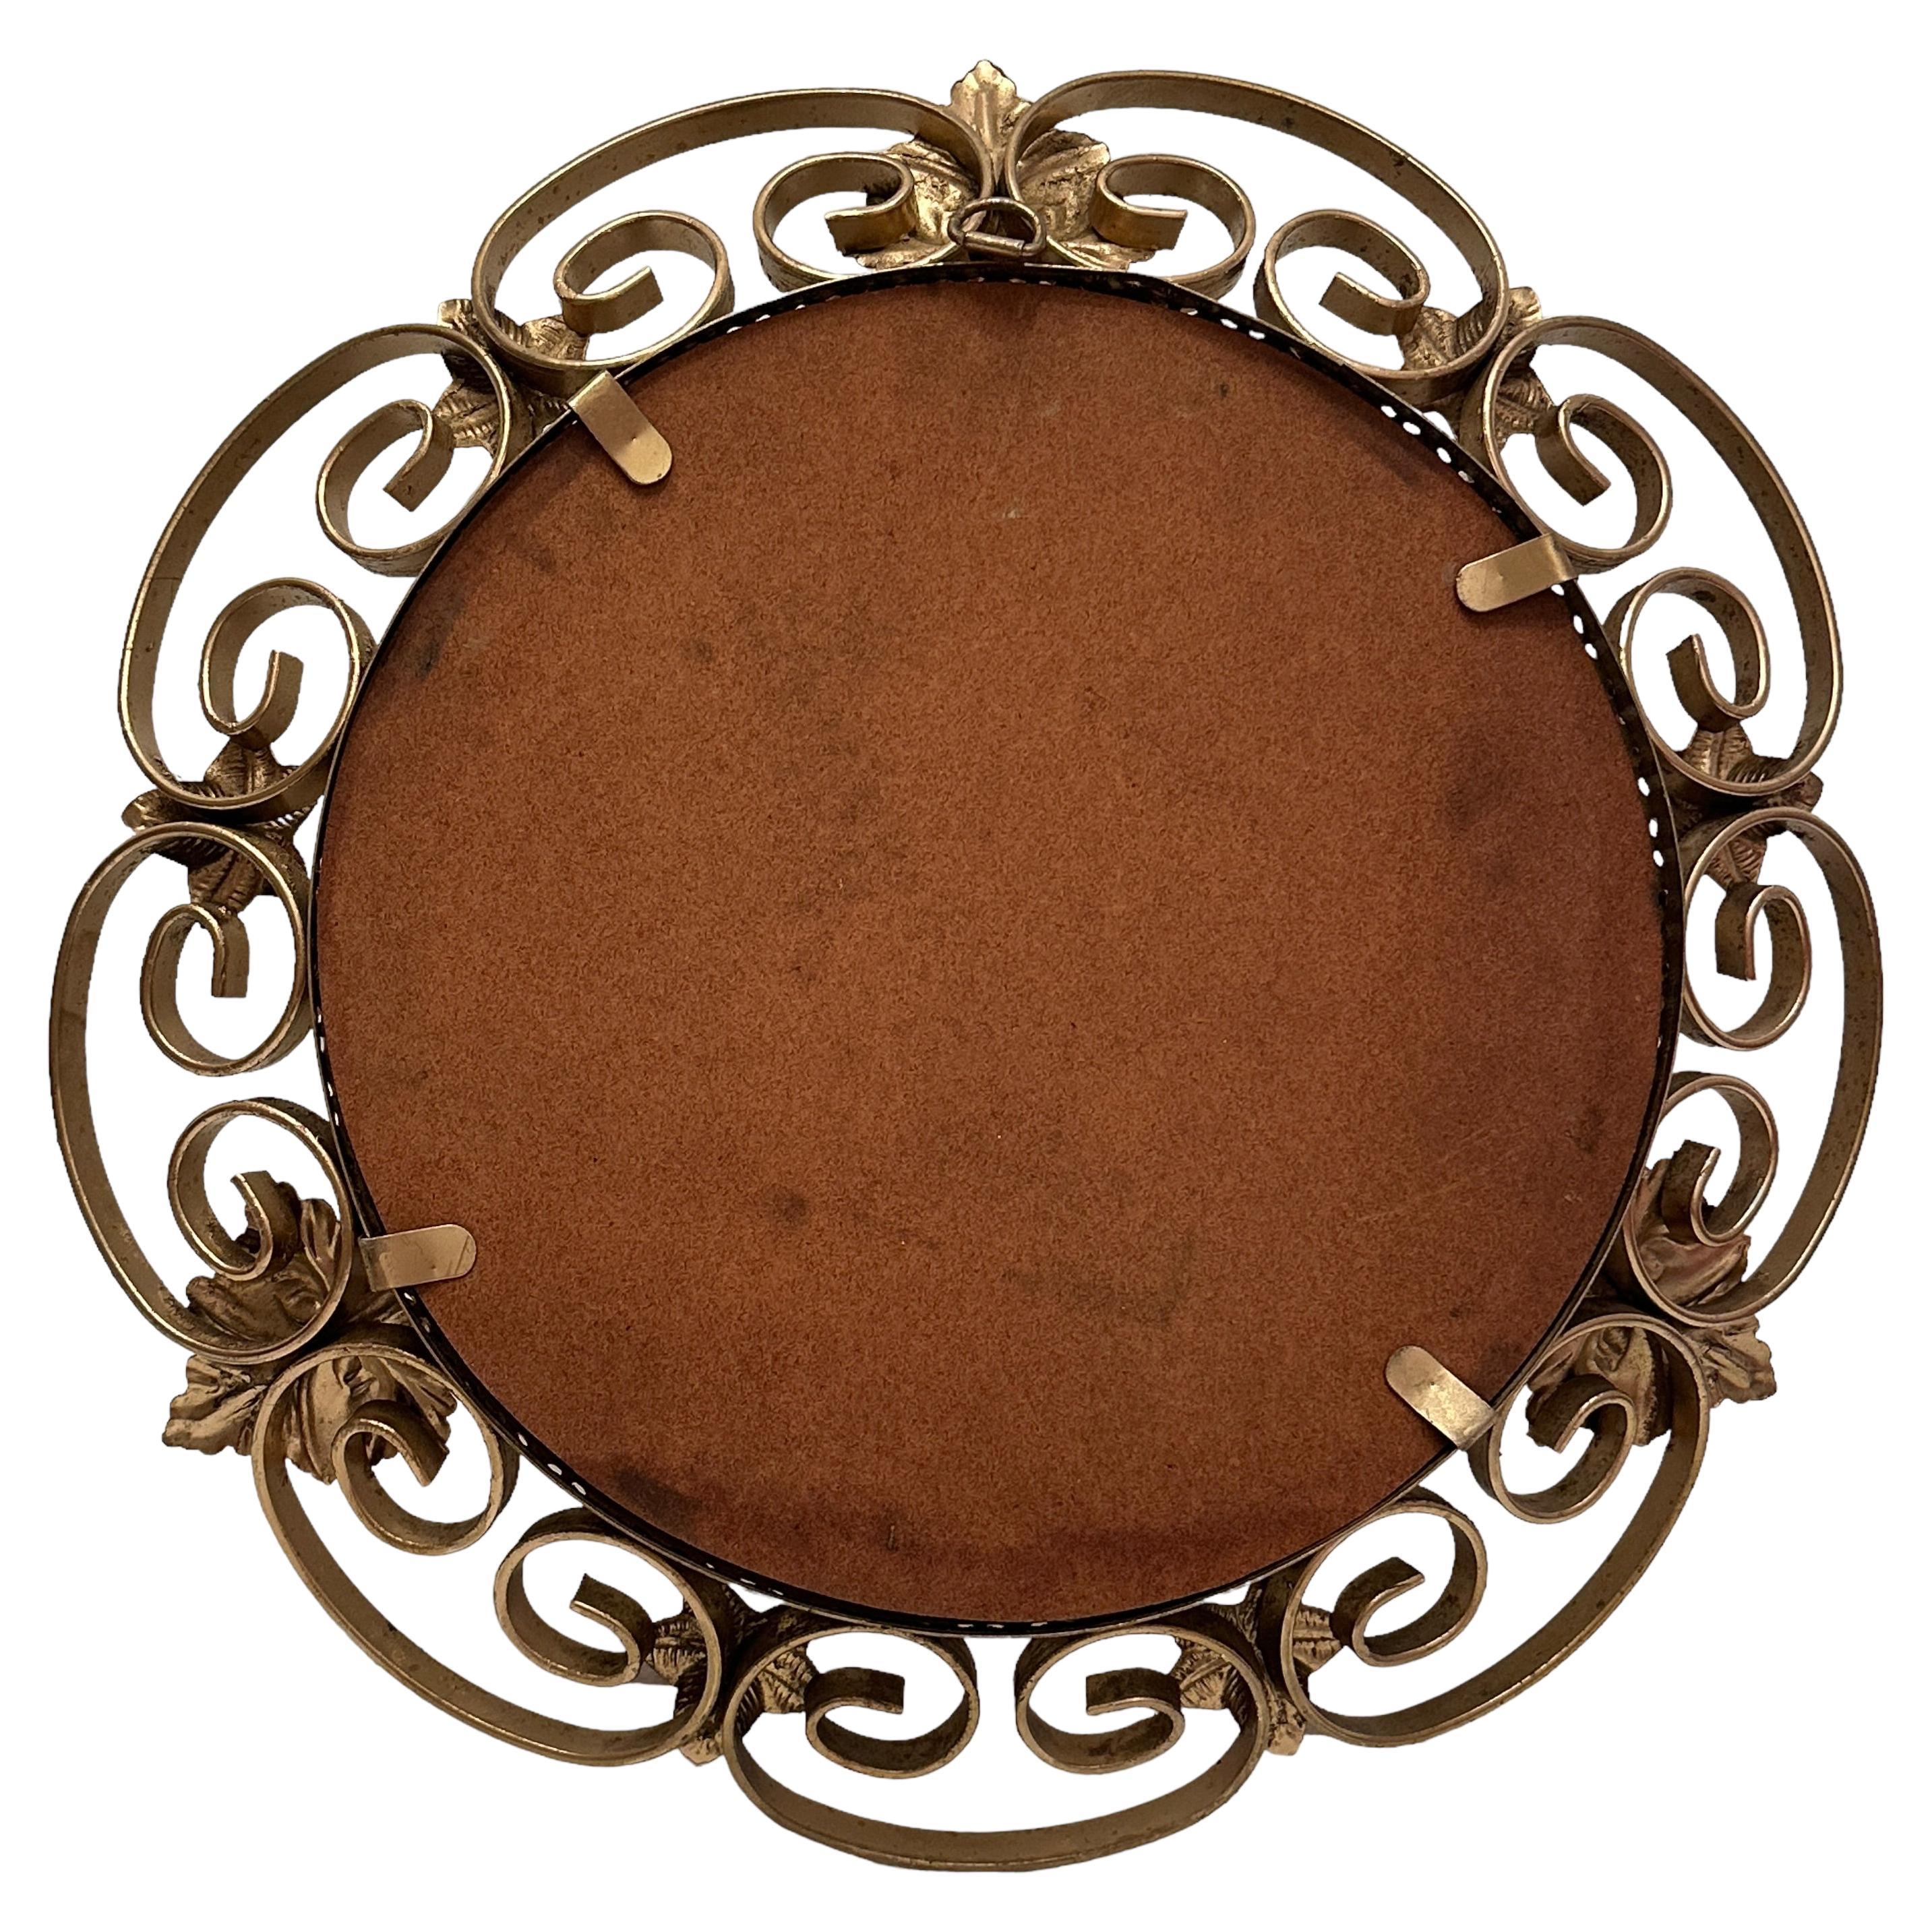 A gorgeous Hollywood Regency mirror. Made of gilded metal. No chips, no cracks, no repairs. It measures approximate 14.25